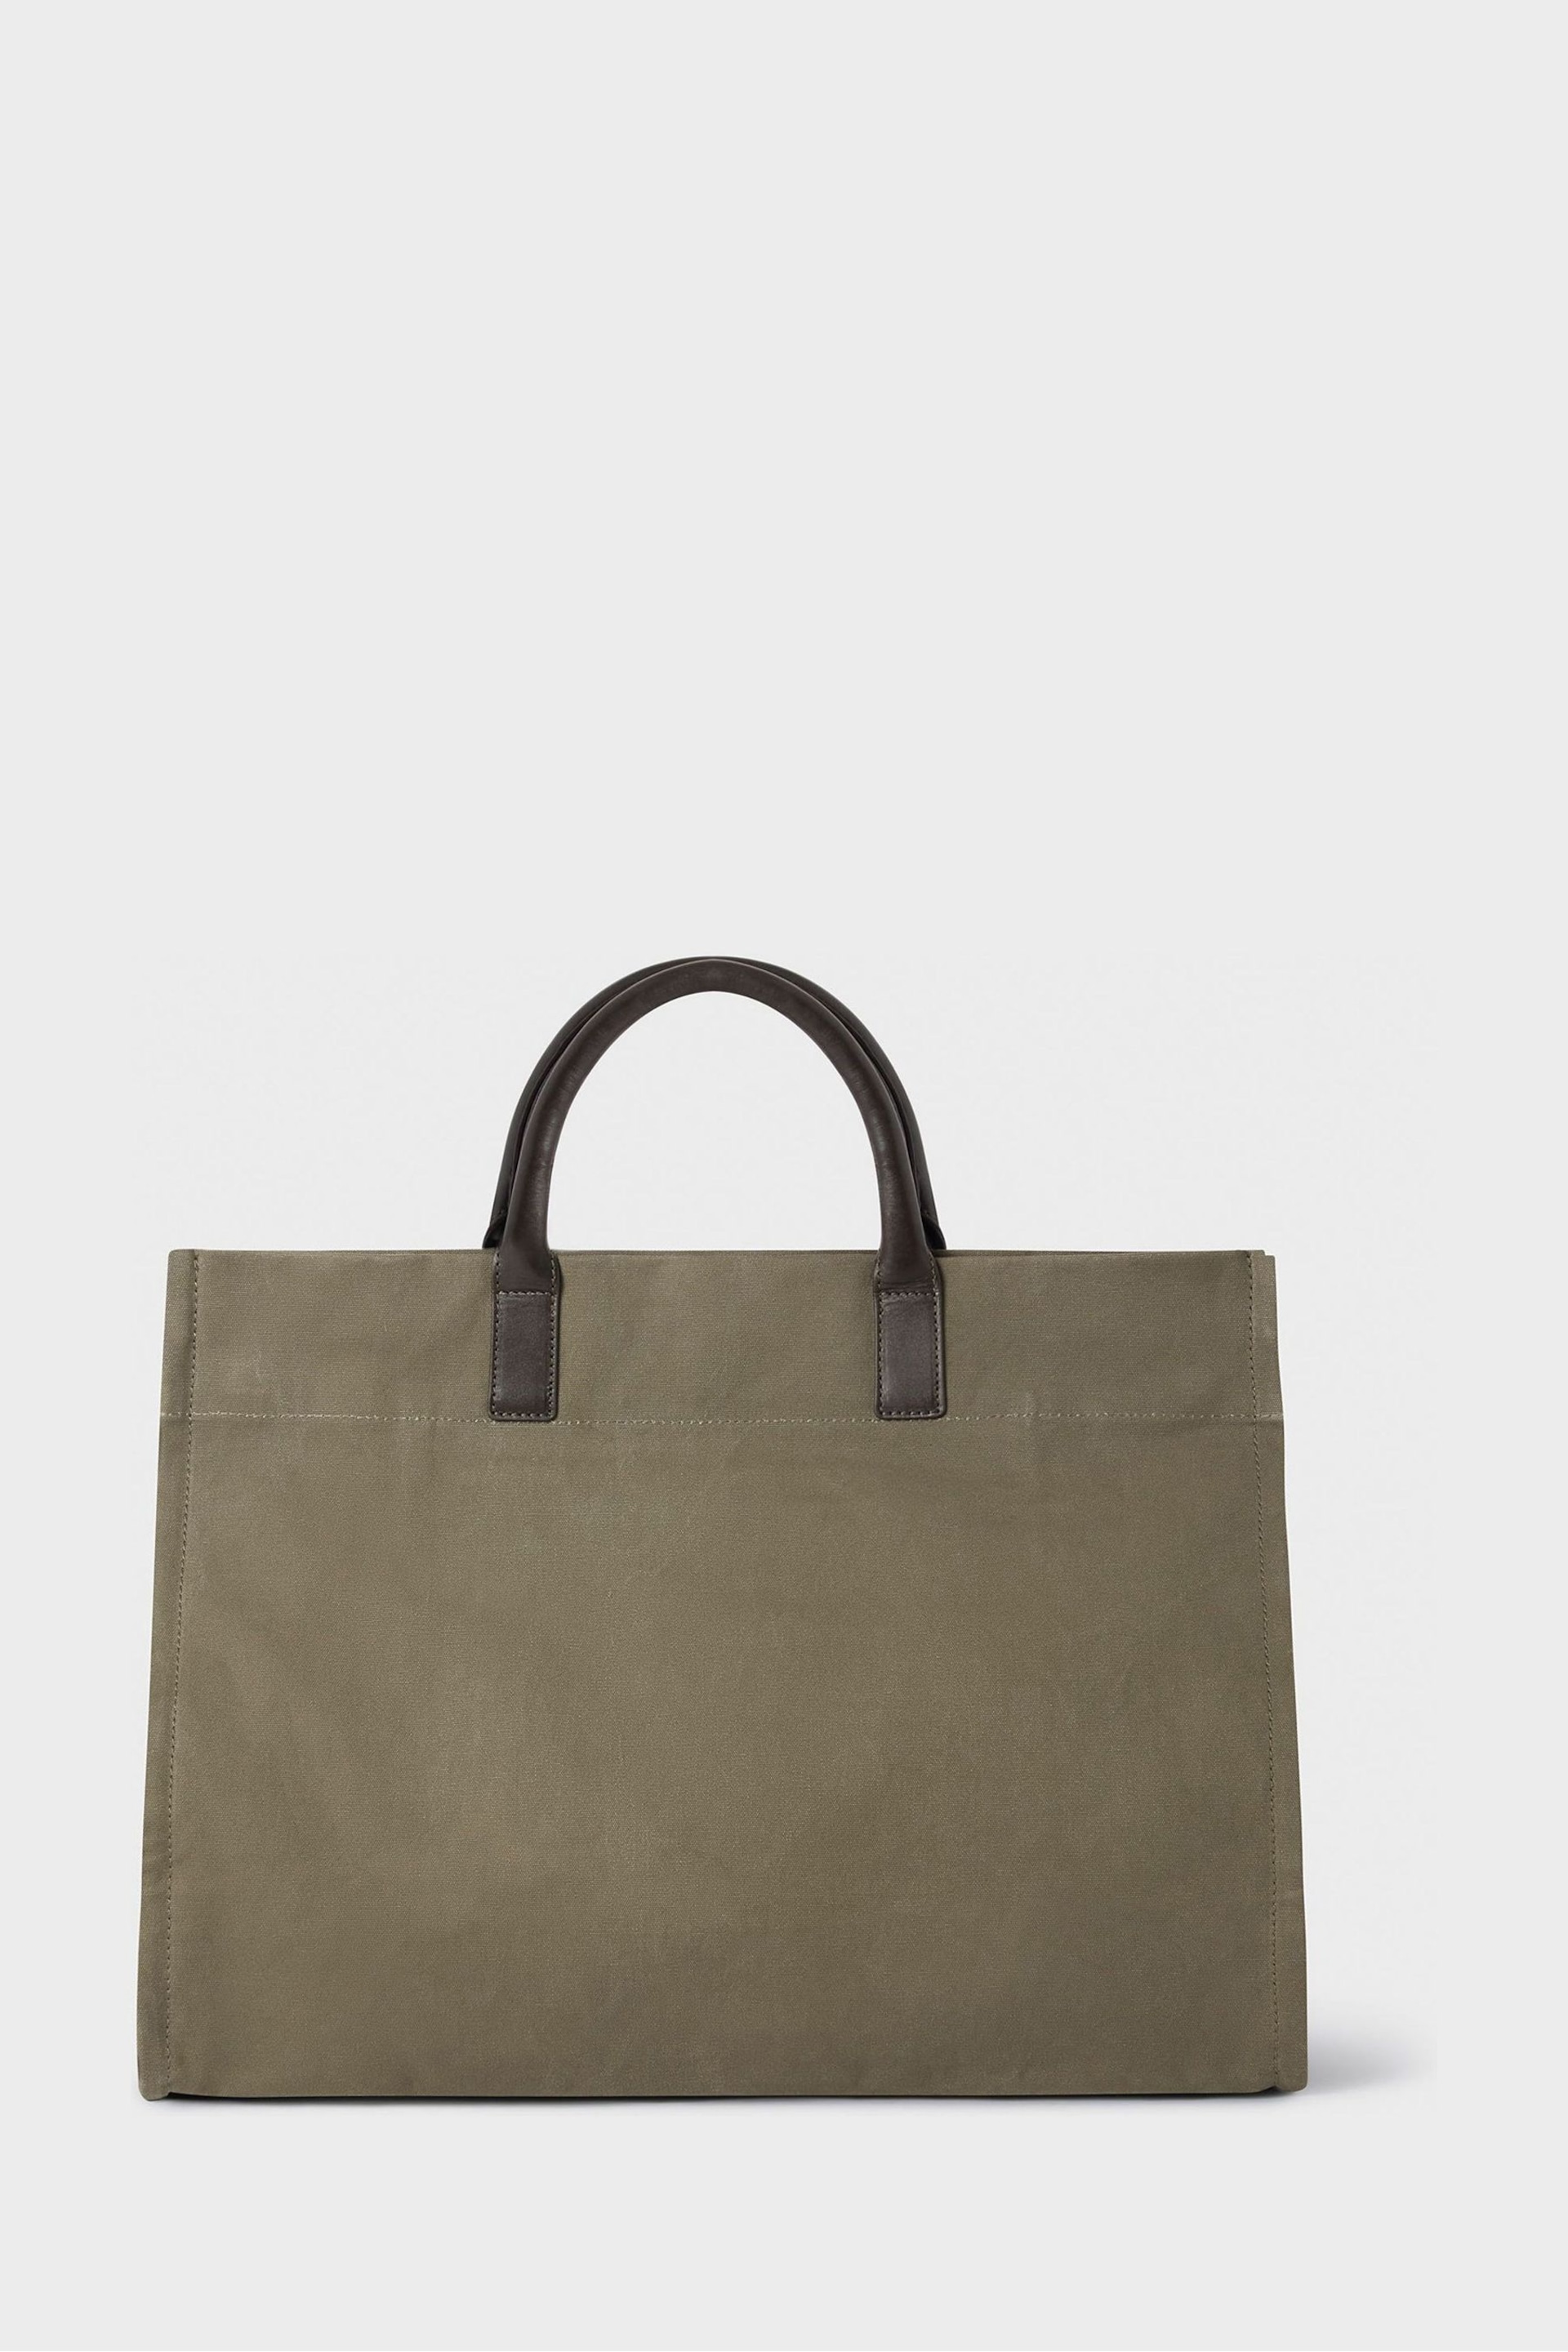 Osprey London The Mac Large Canvas Tote - Image 3 of 6